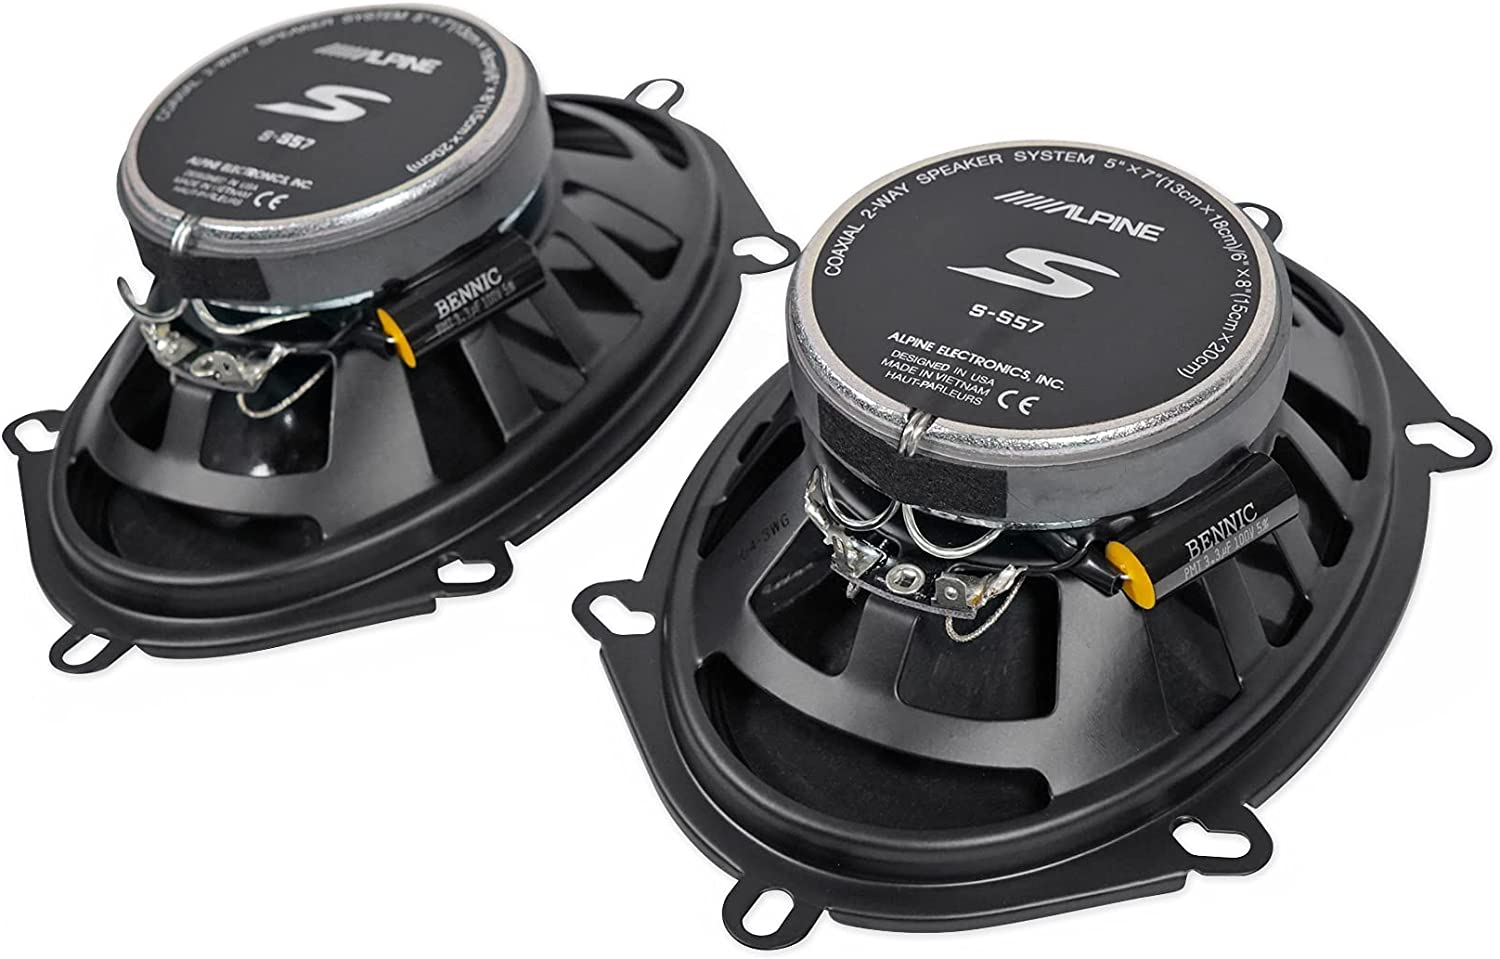 Rear Alpine S 5x7" Factory Speaker Replacement Kit For 1993-2002 Mazda 626